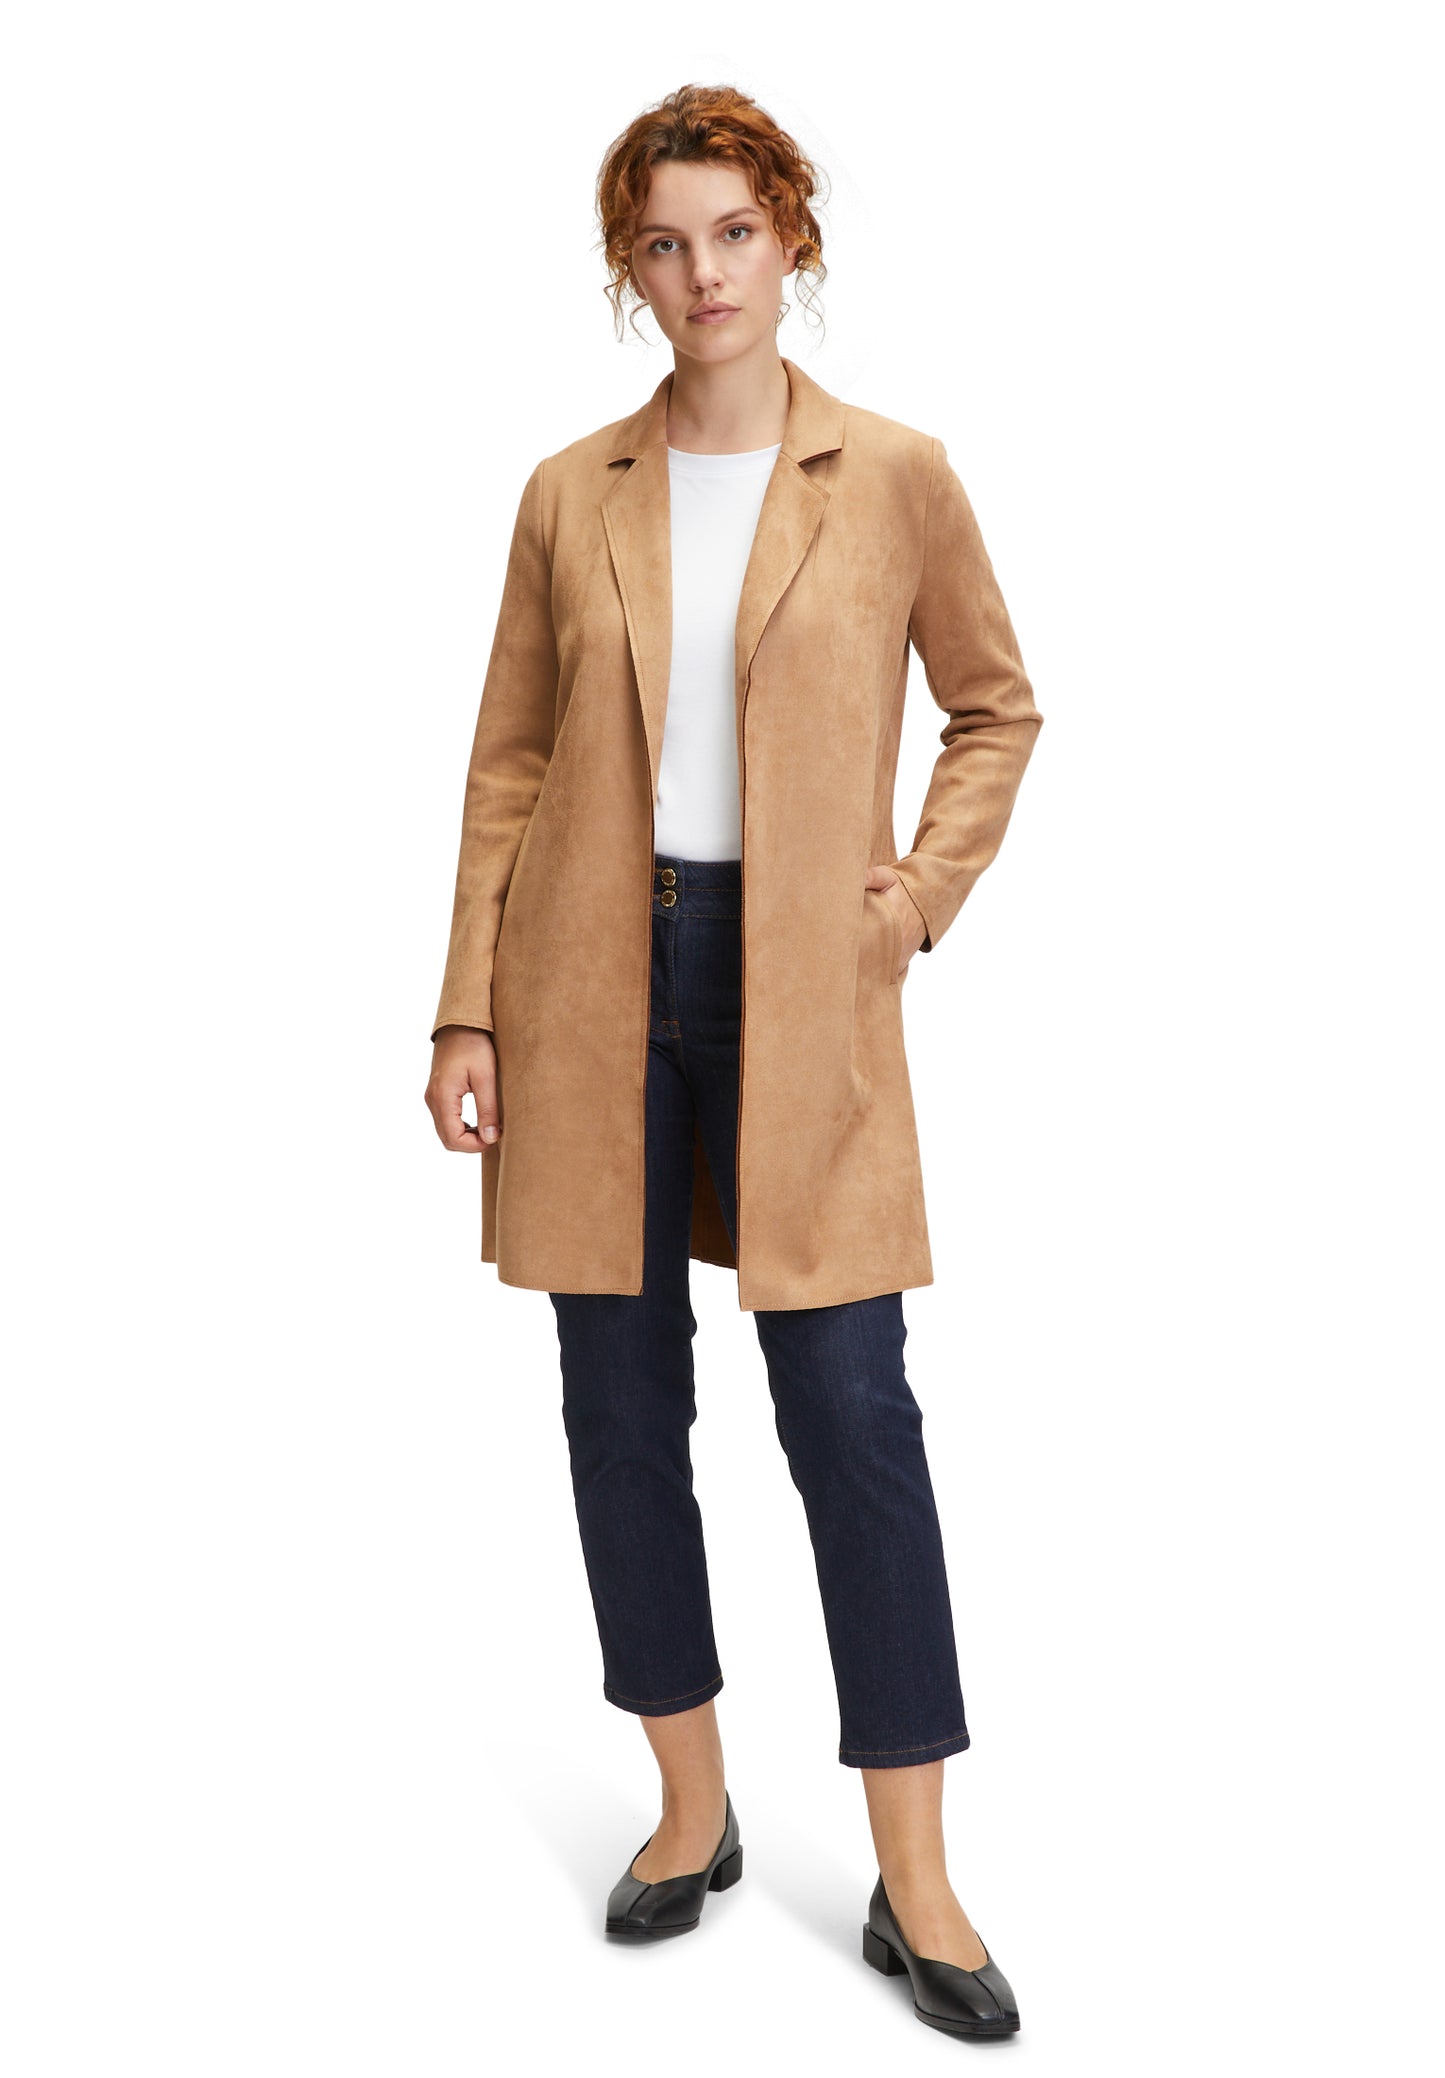 Betty Barclay Faux Suede Coat 4323/1178